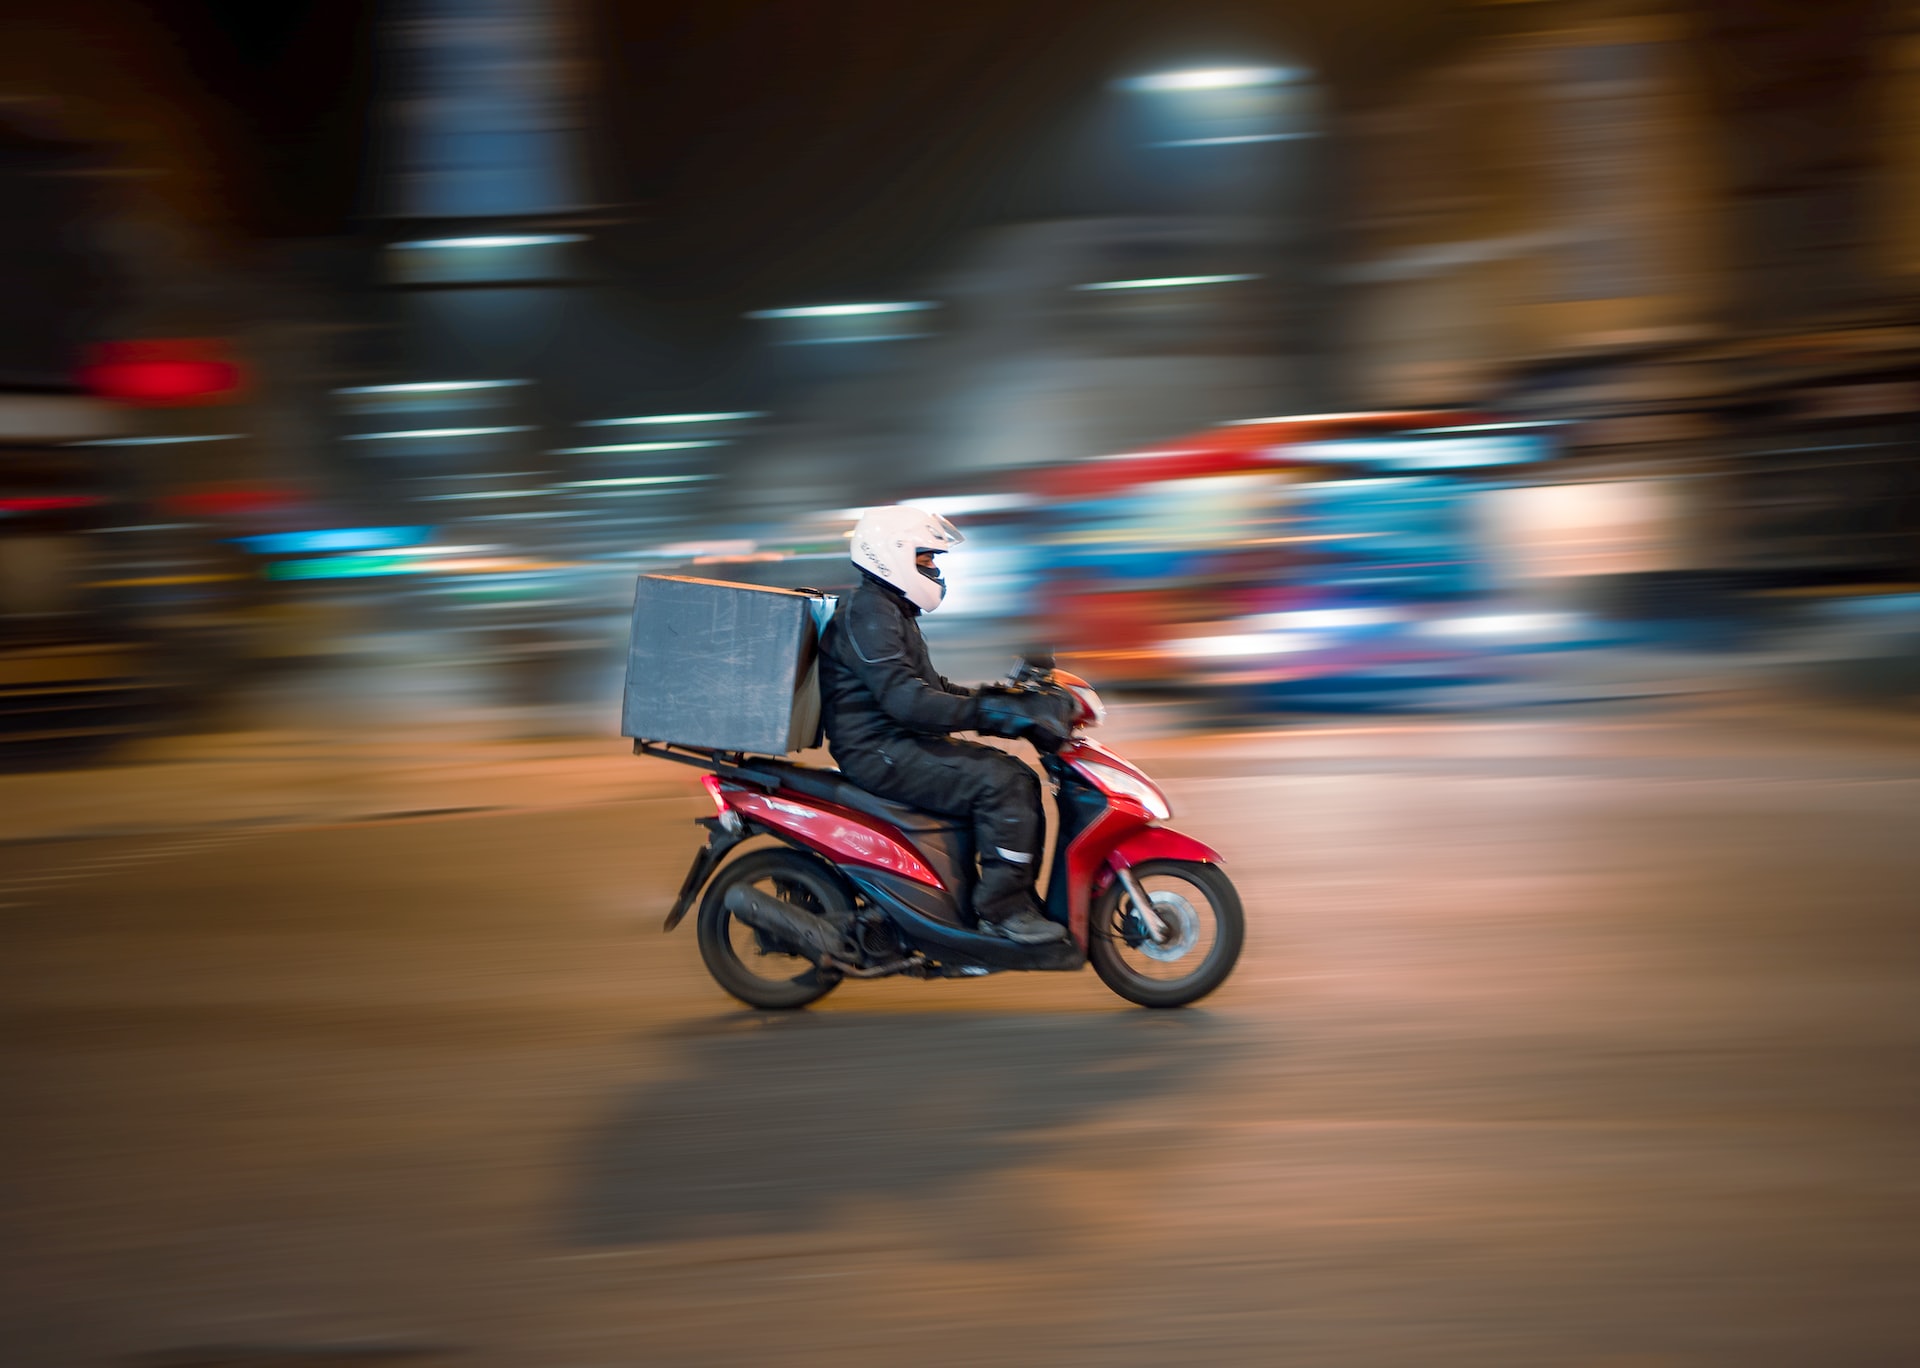 Food Delivery Services: Making People's Lives Better » Slaves Of Intelligence